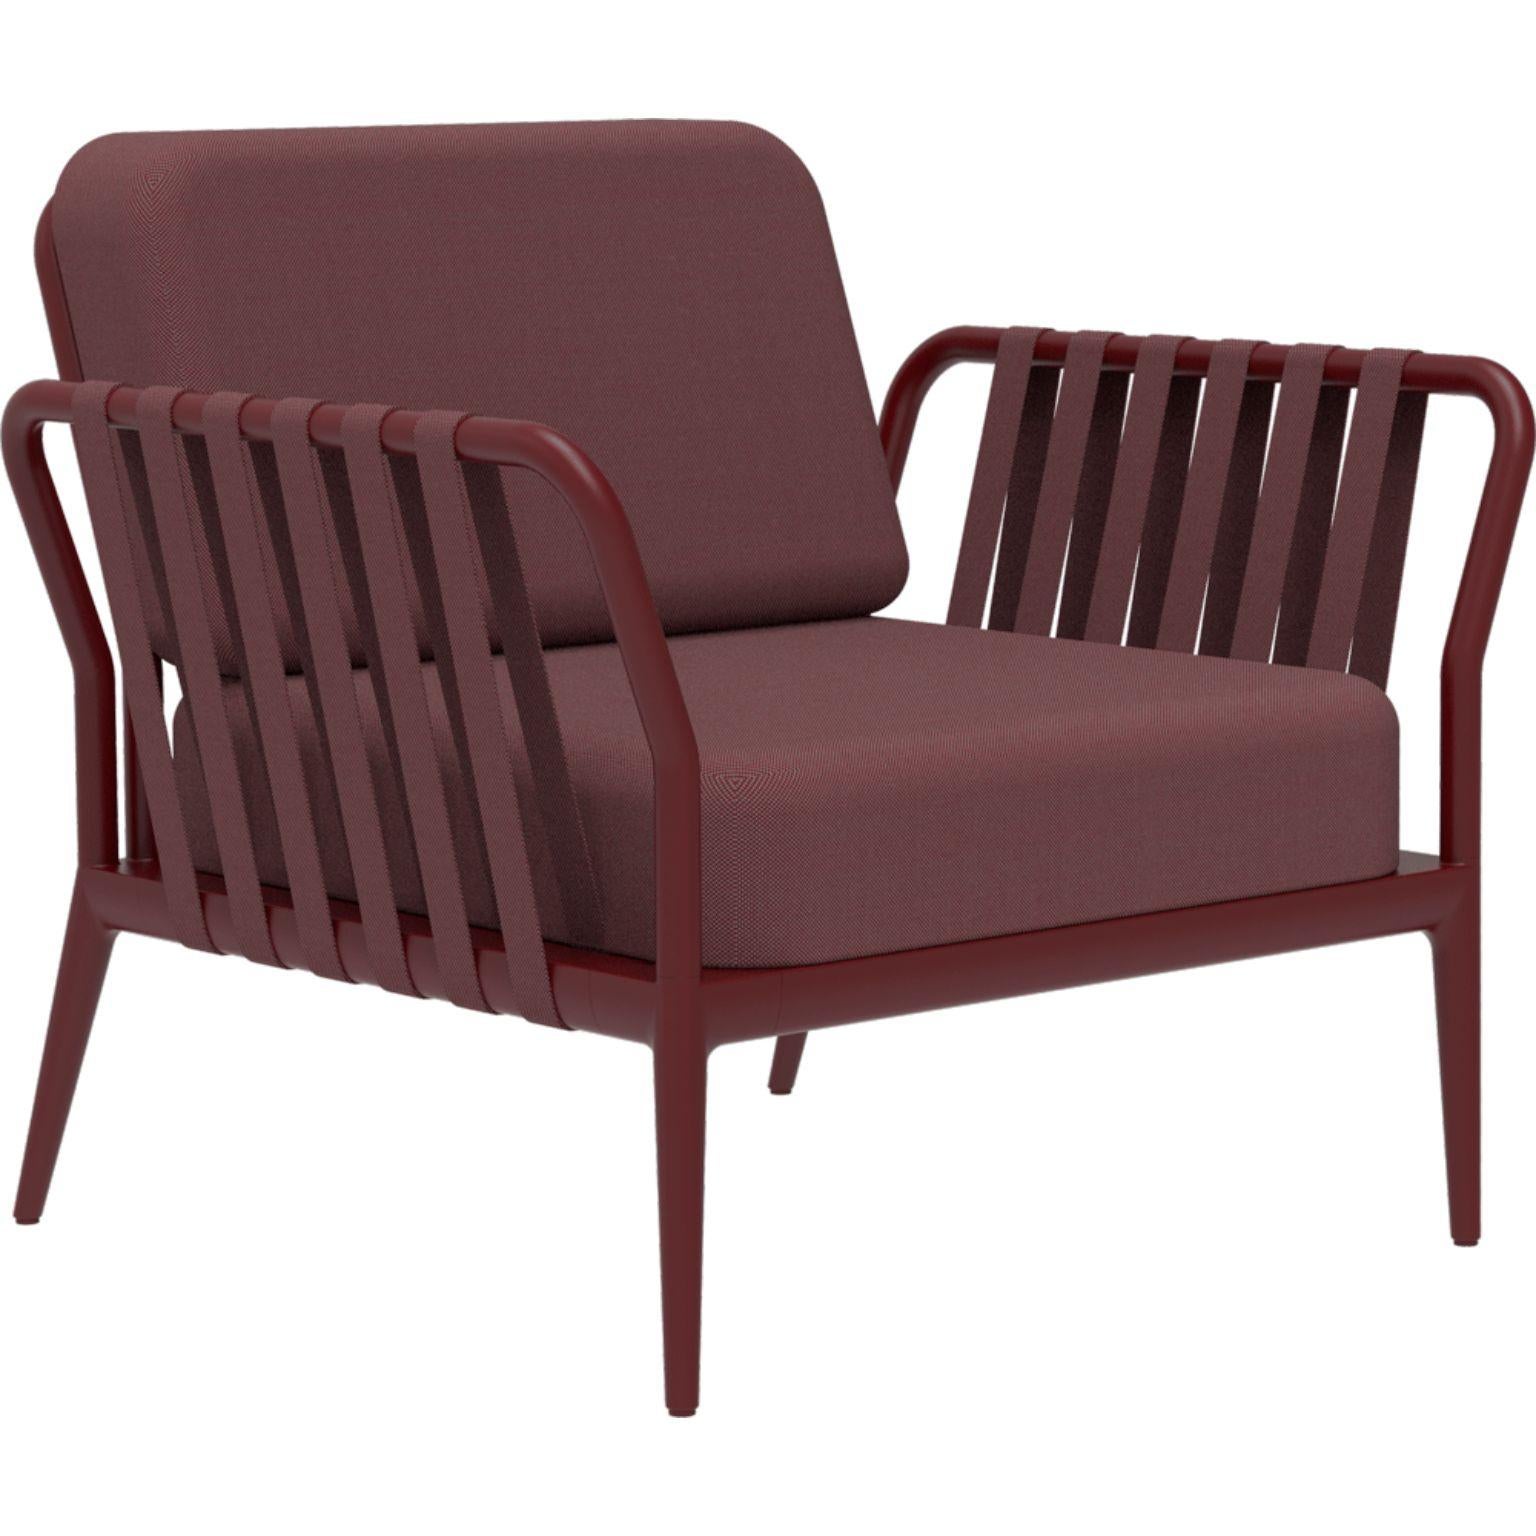 Ribbons Burgundy armchair by MOWEE
Dimensions: D83 x W91 x H81 cm (Seat Height 42 cm)
Material: Aluminum, Upholstery
Weight: 20 kg
Also Available in different colors and finishes. 

An unmistakable collection for its beauty and robustness. A